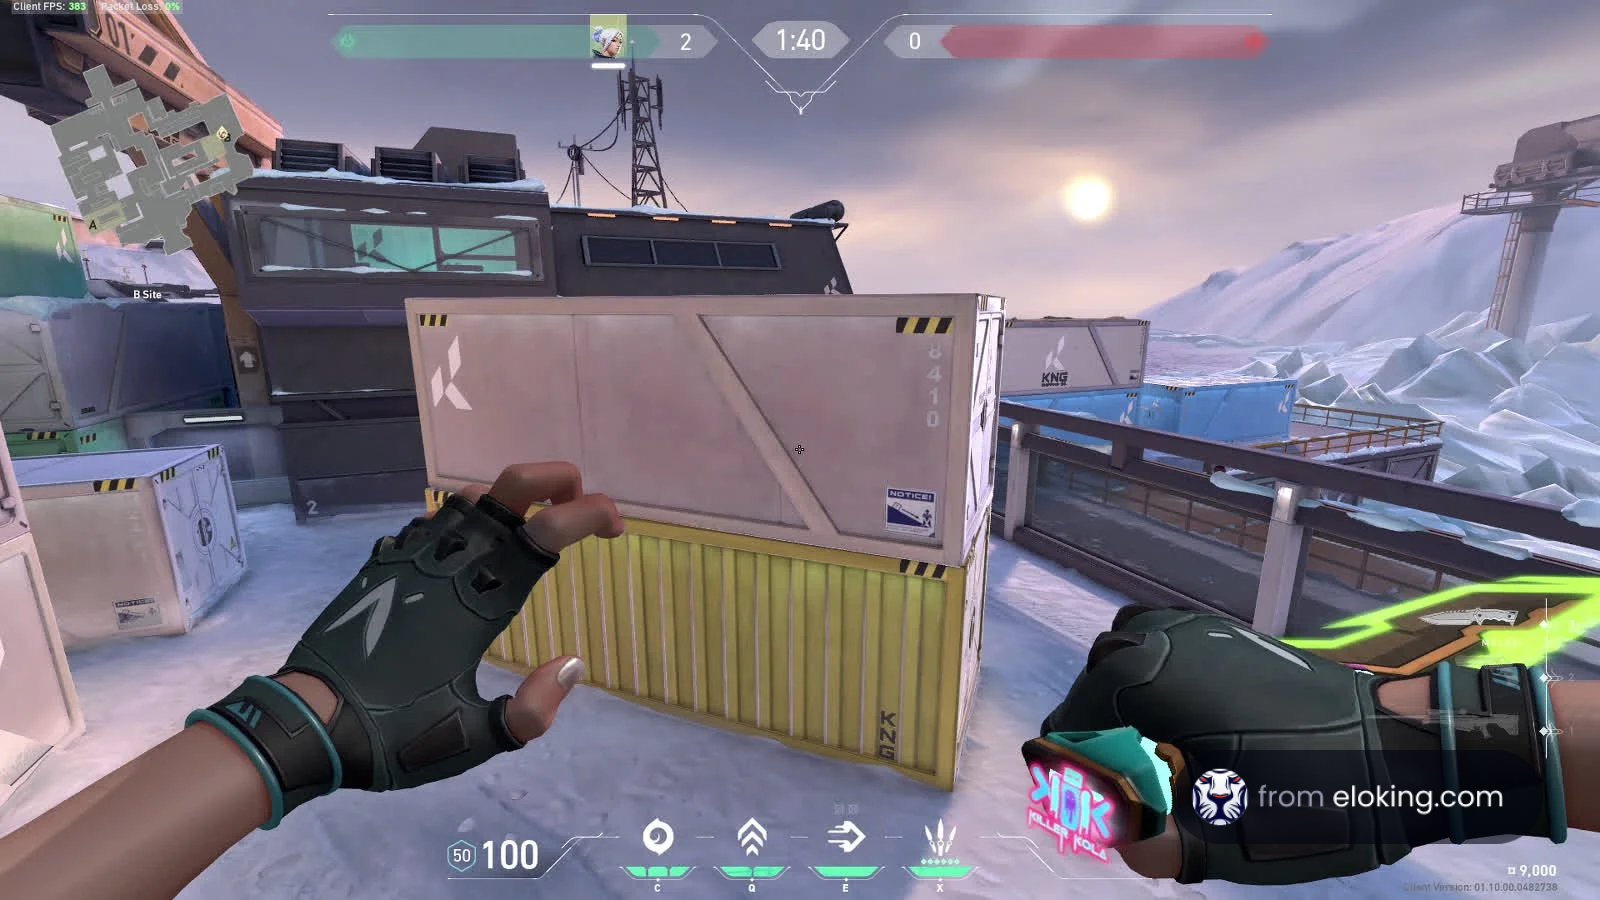 First-person view of a player in a futuristic shooter game on an icy map